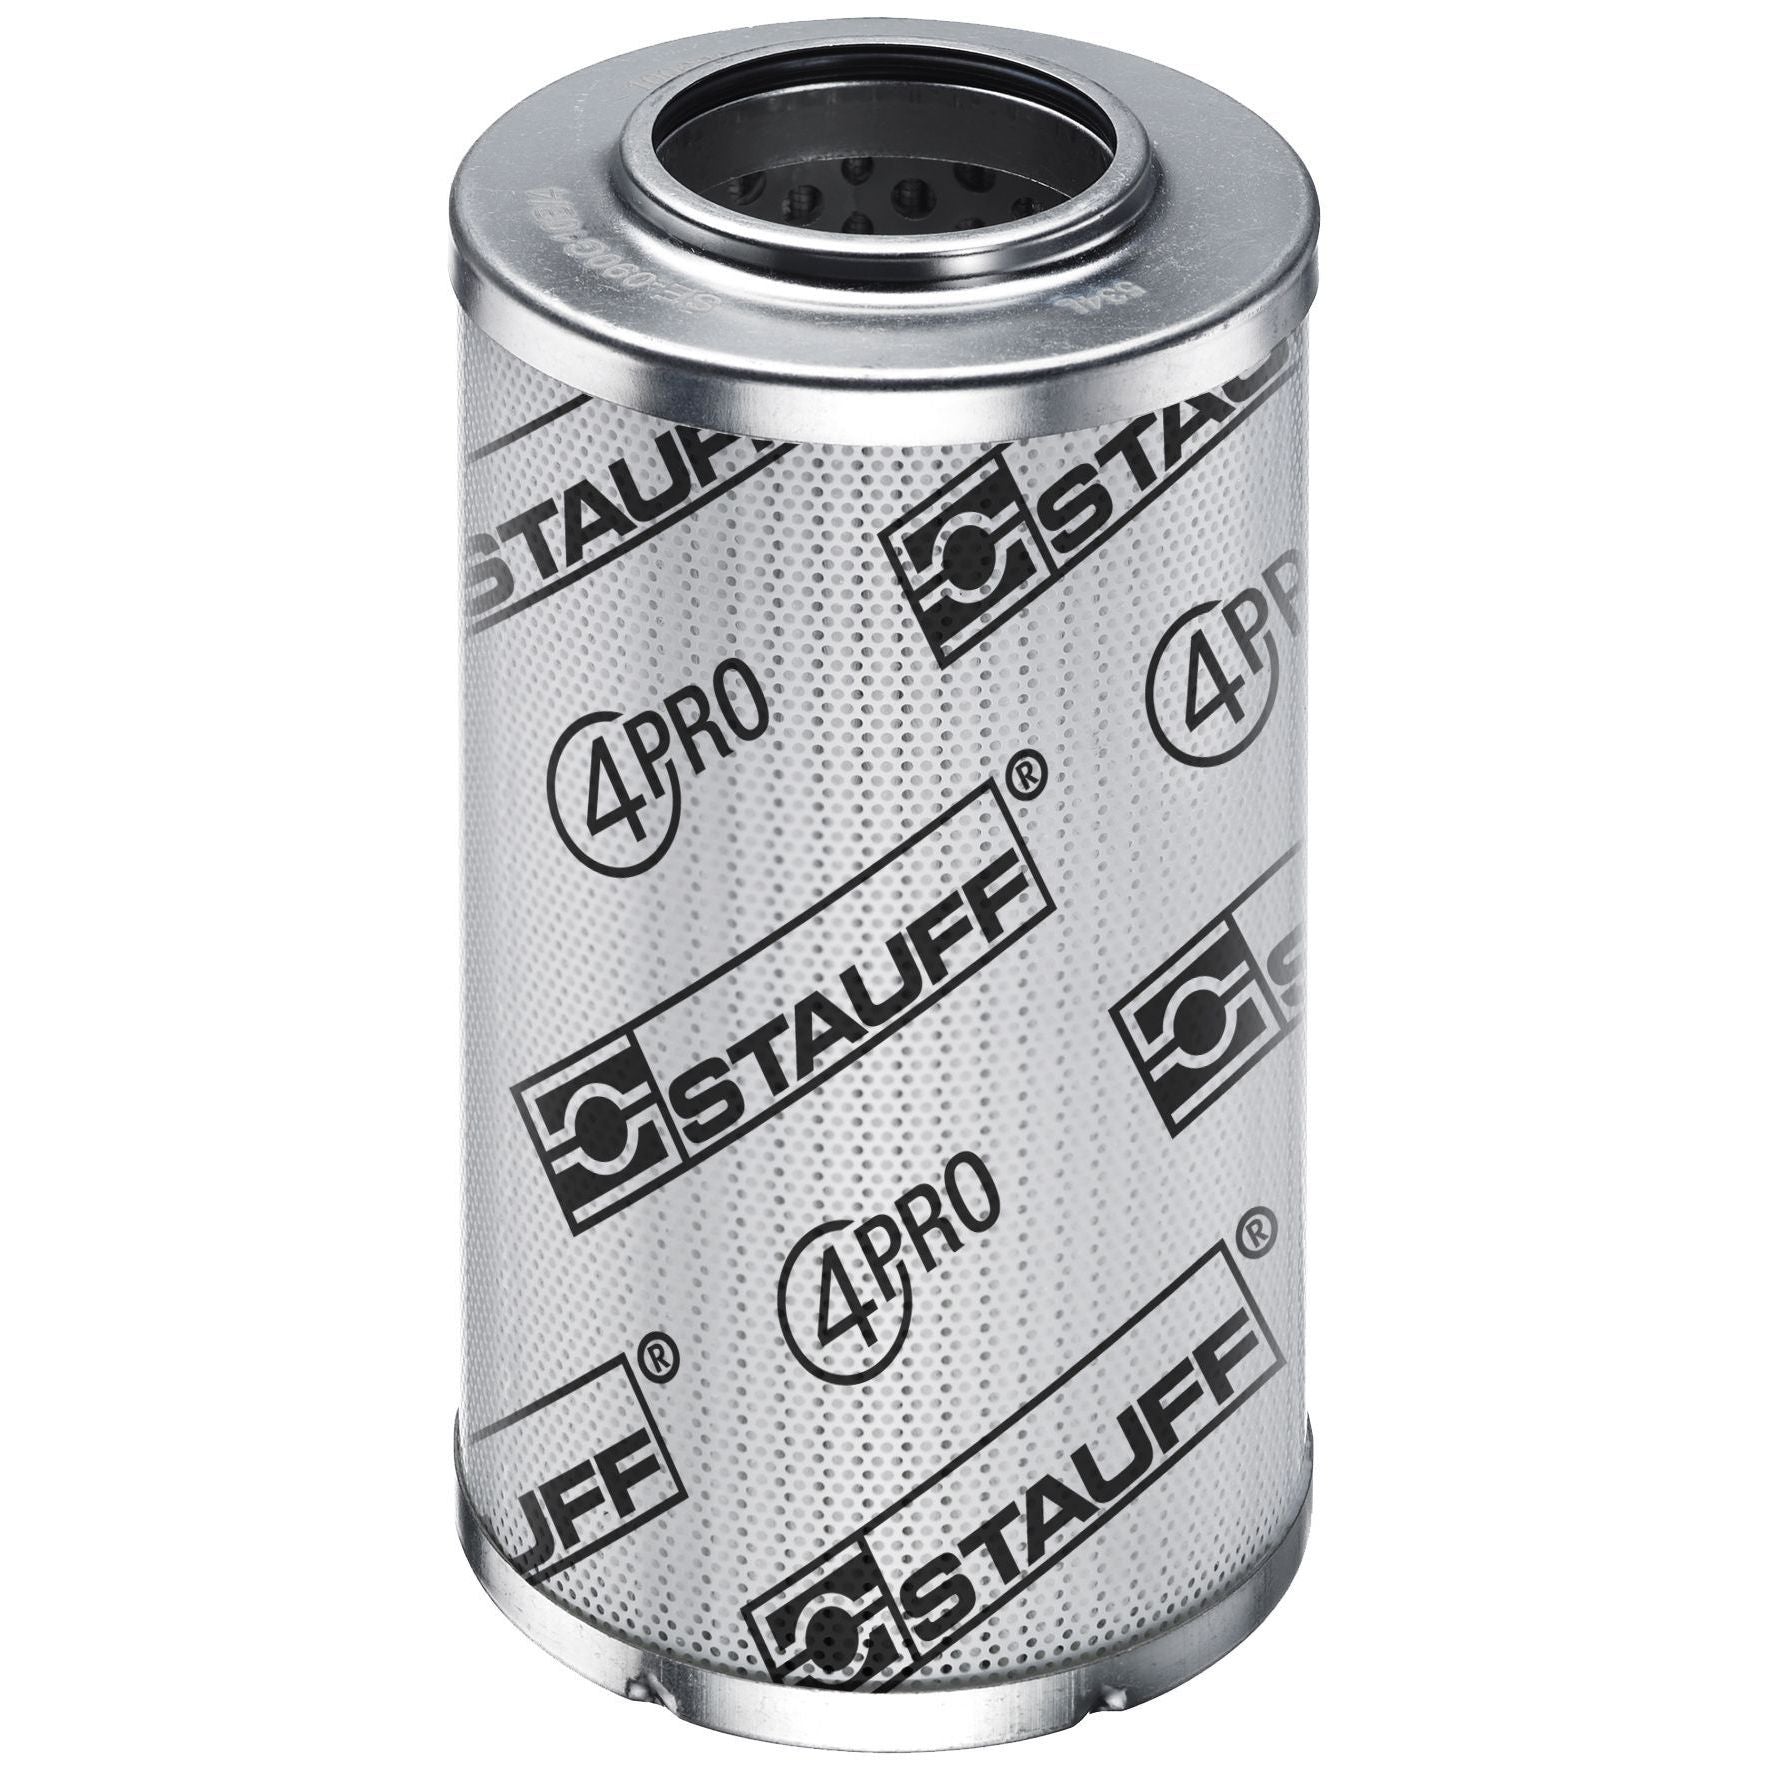 SE-070-H-03-V/4 : Stauff SF-070 Series Filter Element, 3 Micron, Synthetic, 3045psi Collapse Differential, Viton Seals